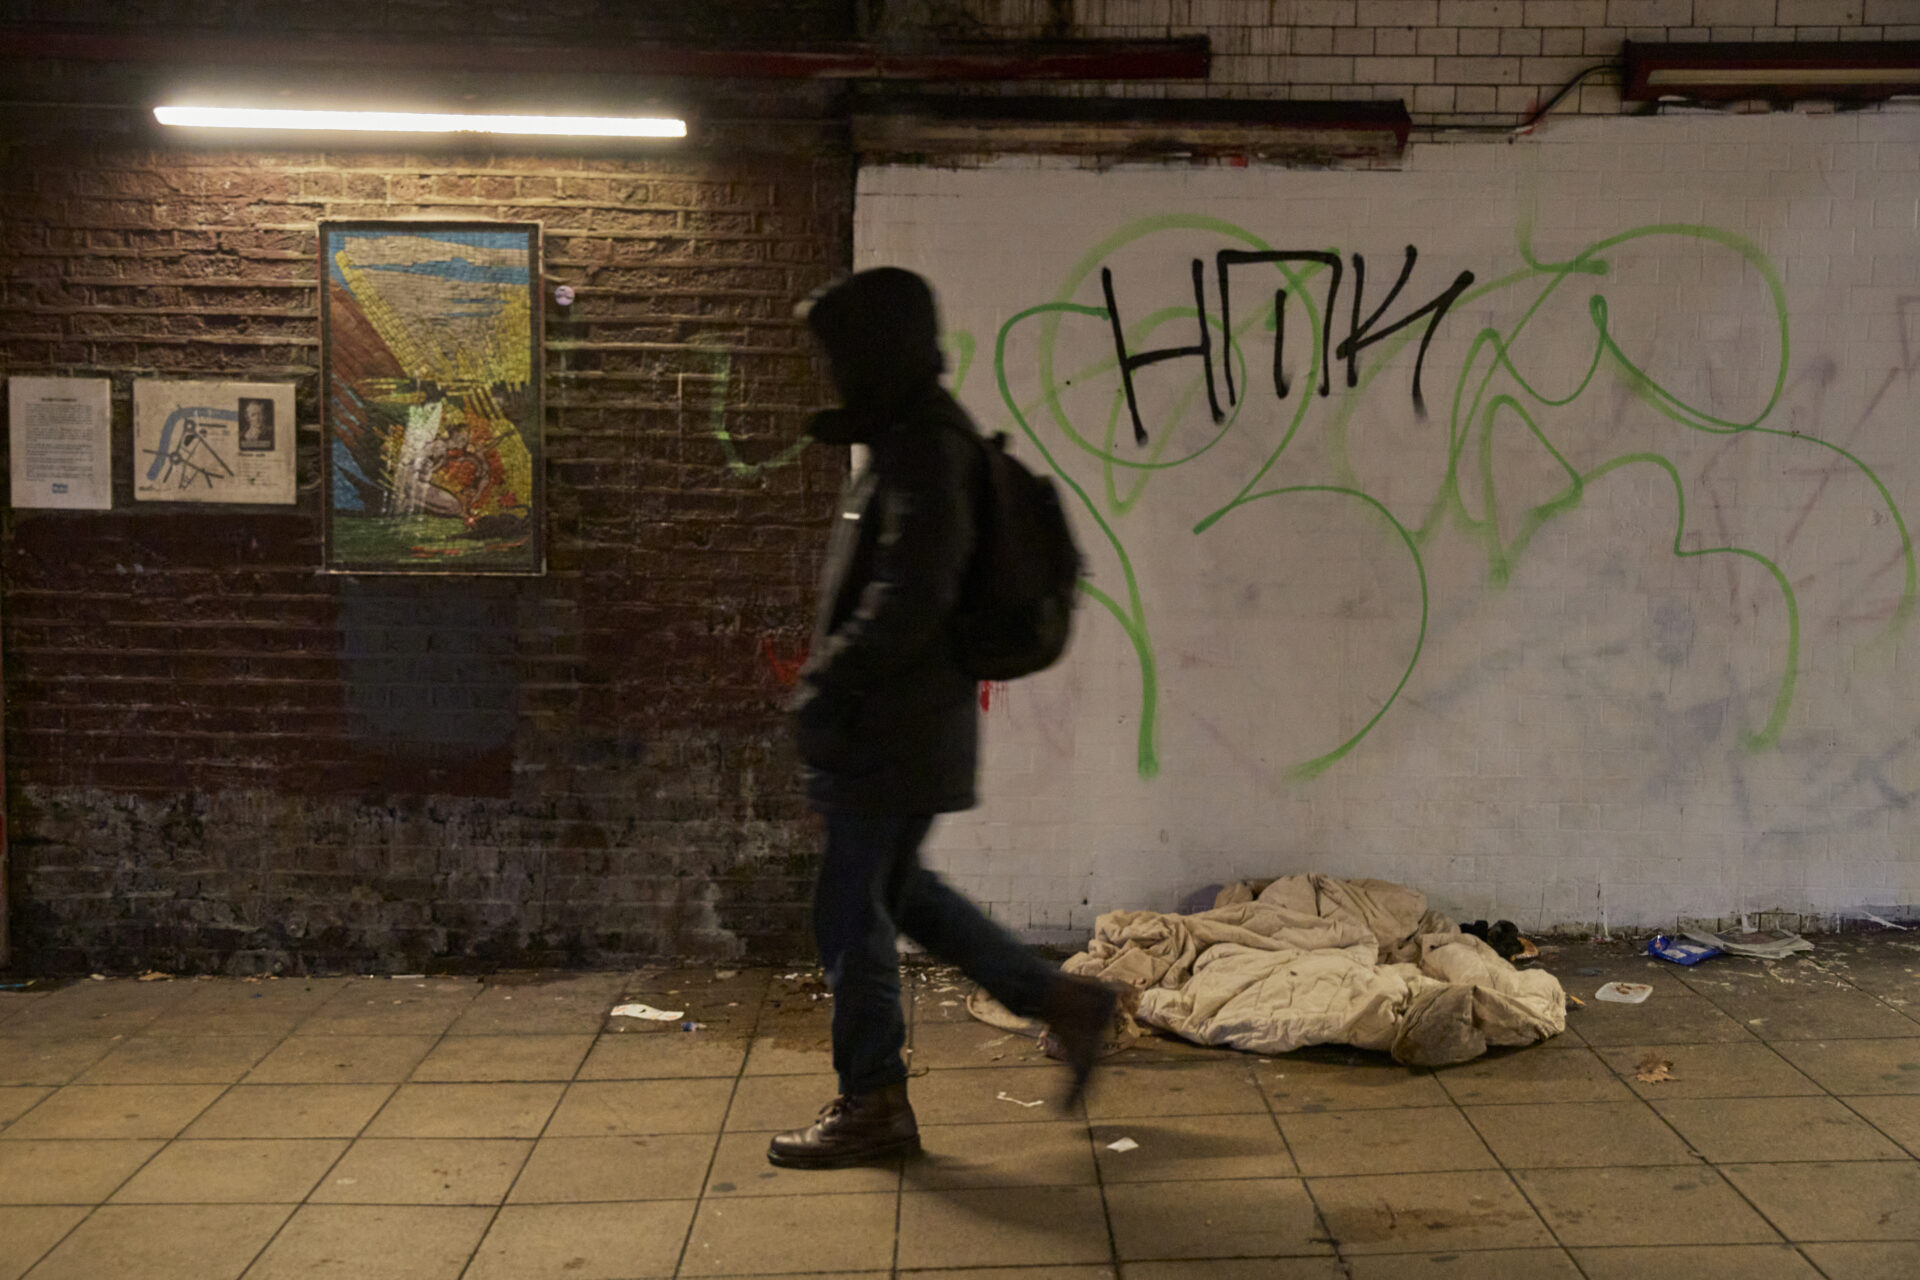 Latest annual figures reveal the full extent of the homelessness crisis